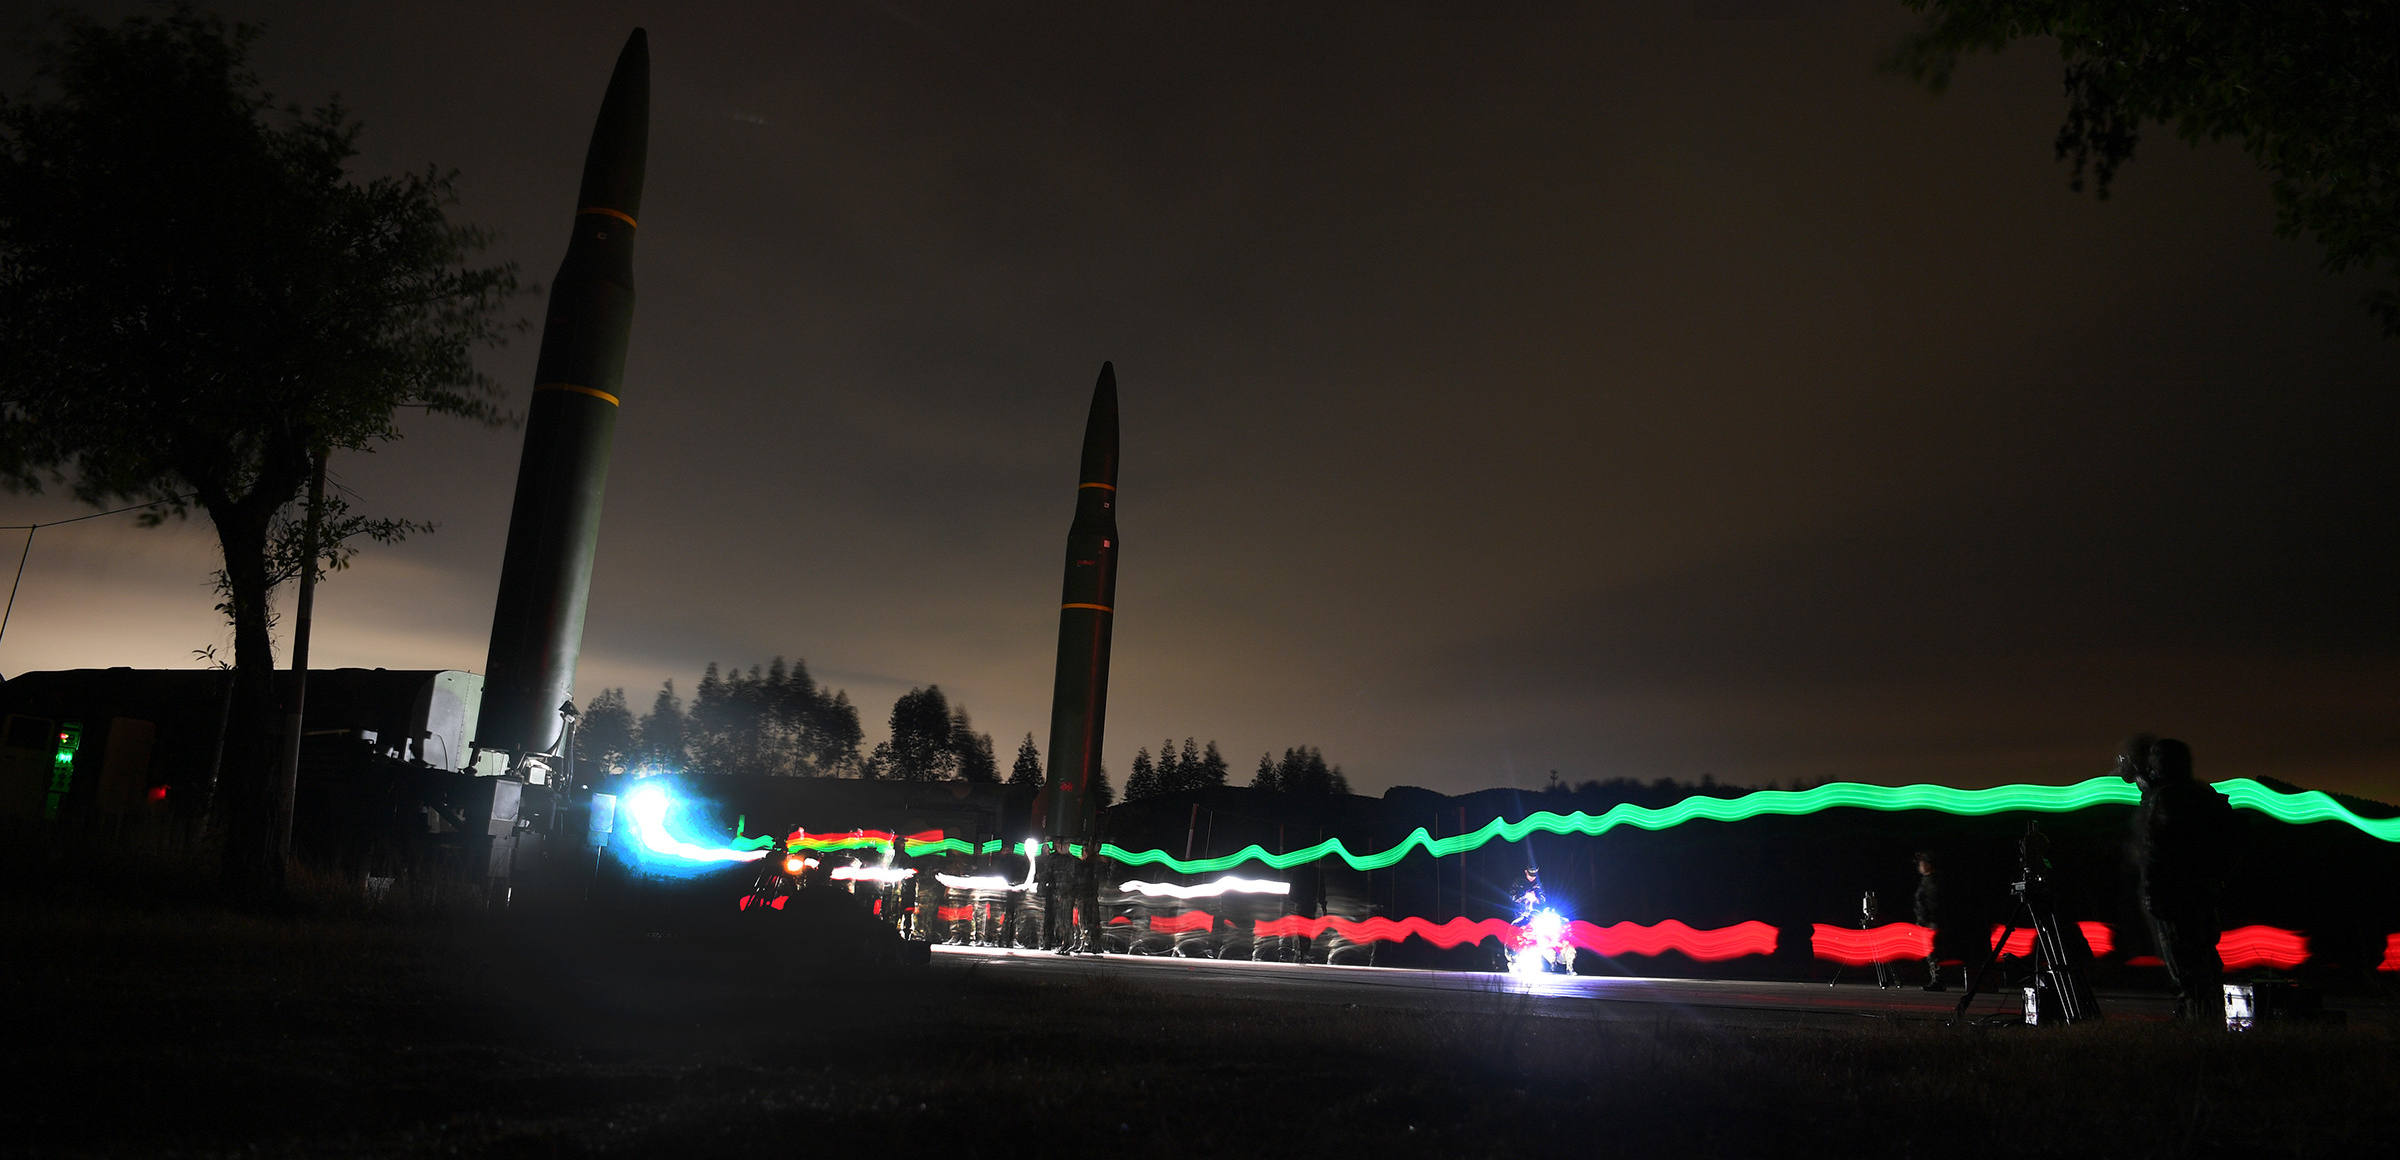 Chinese PLA Rocket Force erecting DF-16 ballistic missiles during a night time training exercise on January 16, 2020. Source: eng.chinamil.com.cn.